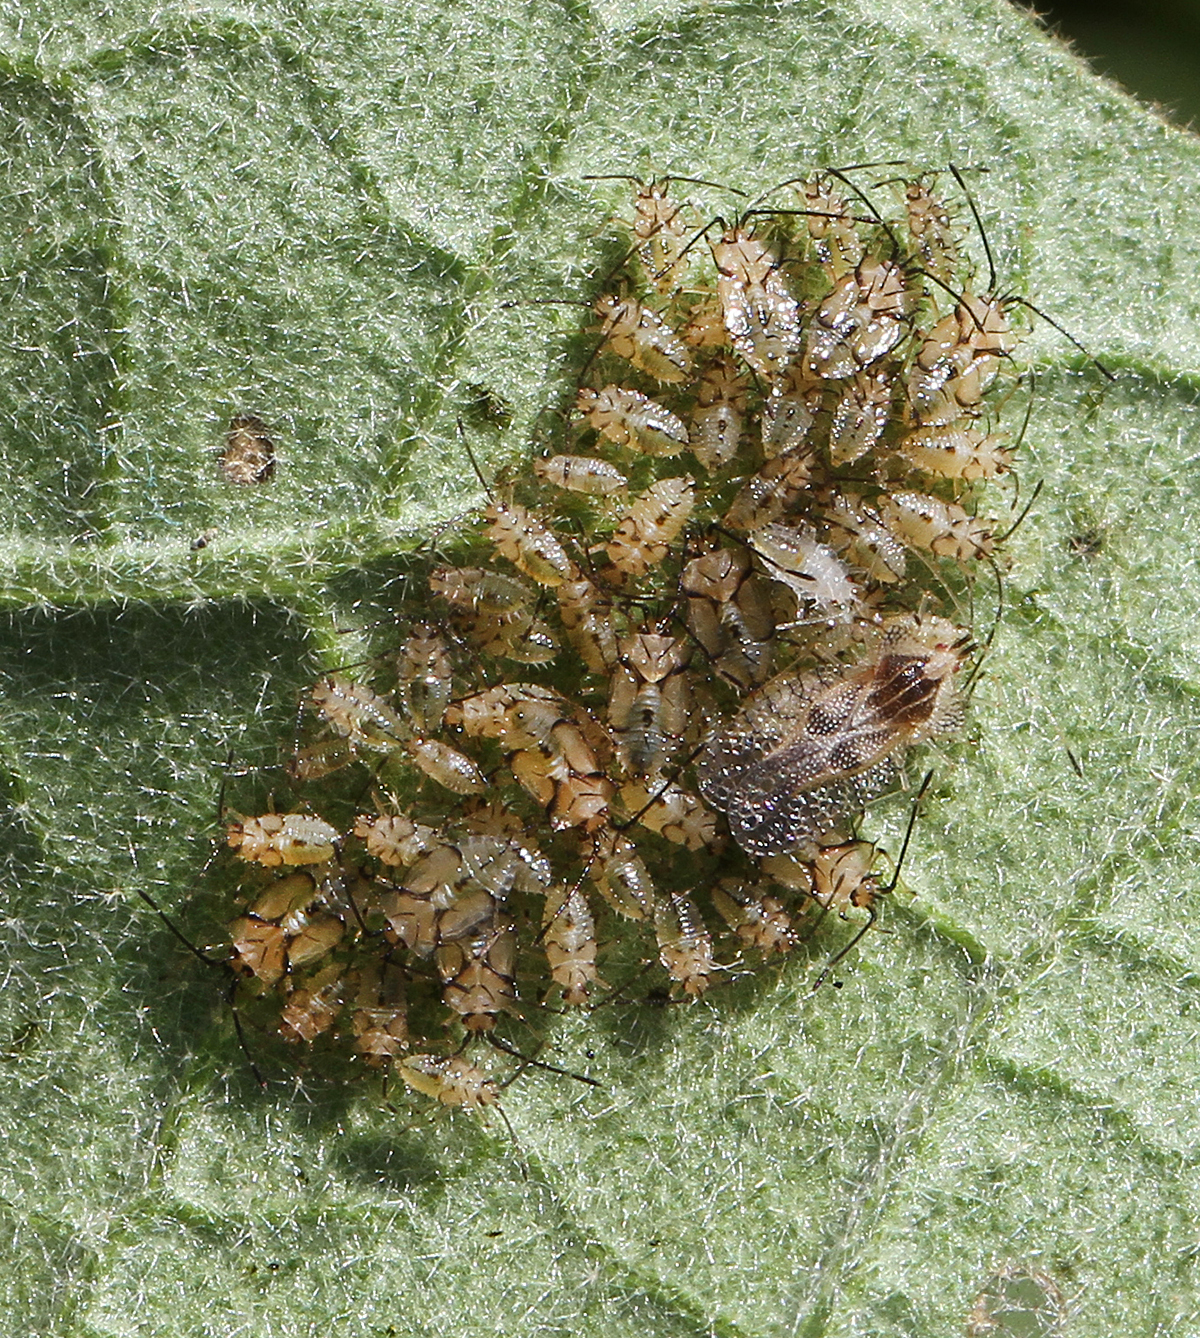 Eggplant lace bug adult with newly hatched nymphs